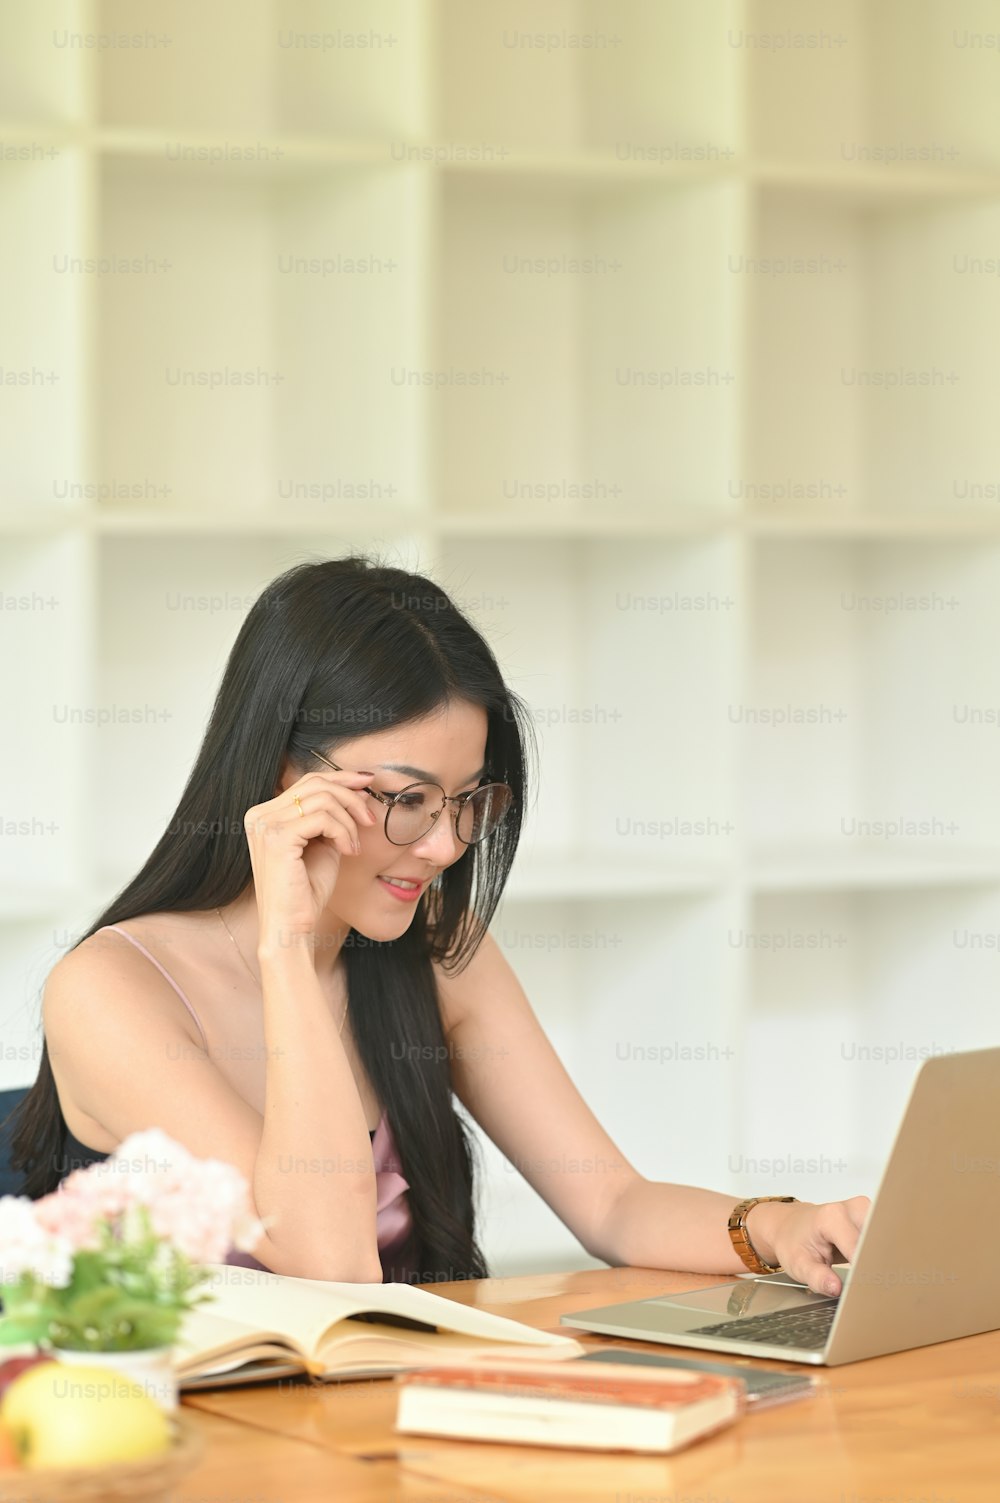 A woman with glasses is using a computer laptop while sitting at the wooden working desk.